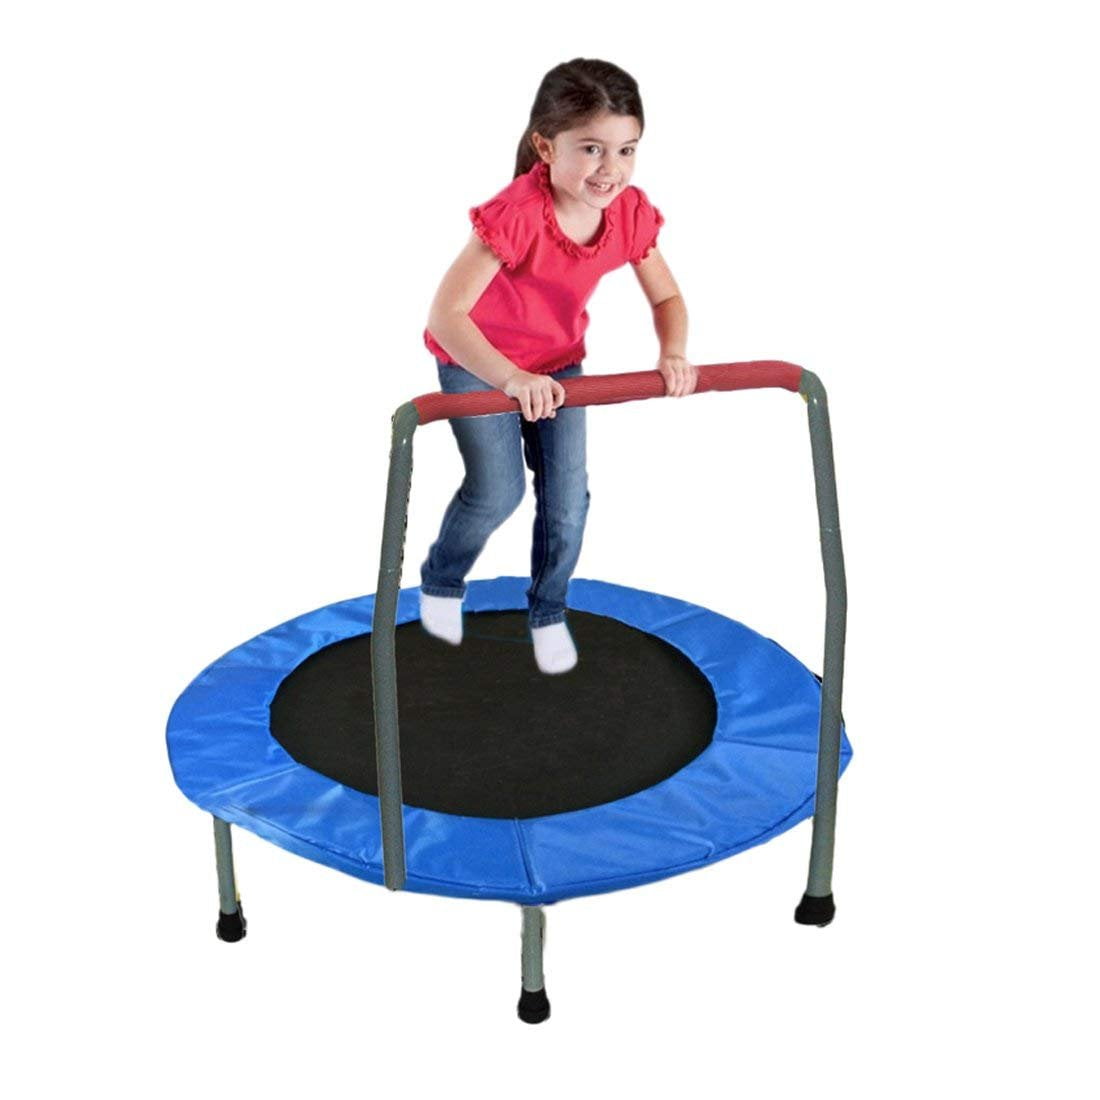 Scallop Foldable Fitness Trampoline Adult Kids Mini Rebounder Trampoline with adjustable Handrail for Indoor Outdoor Exercise Jumper UK Stock 